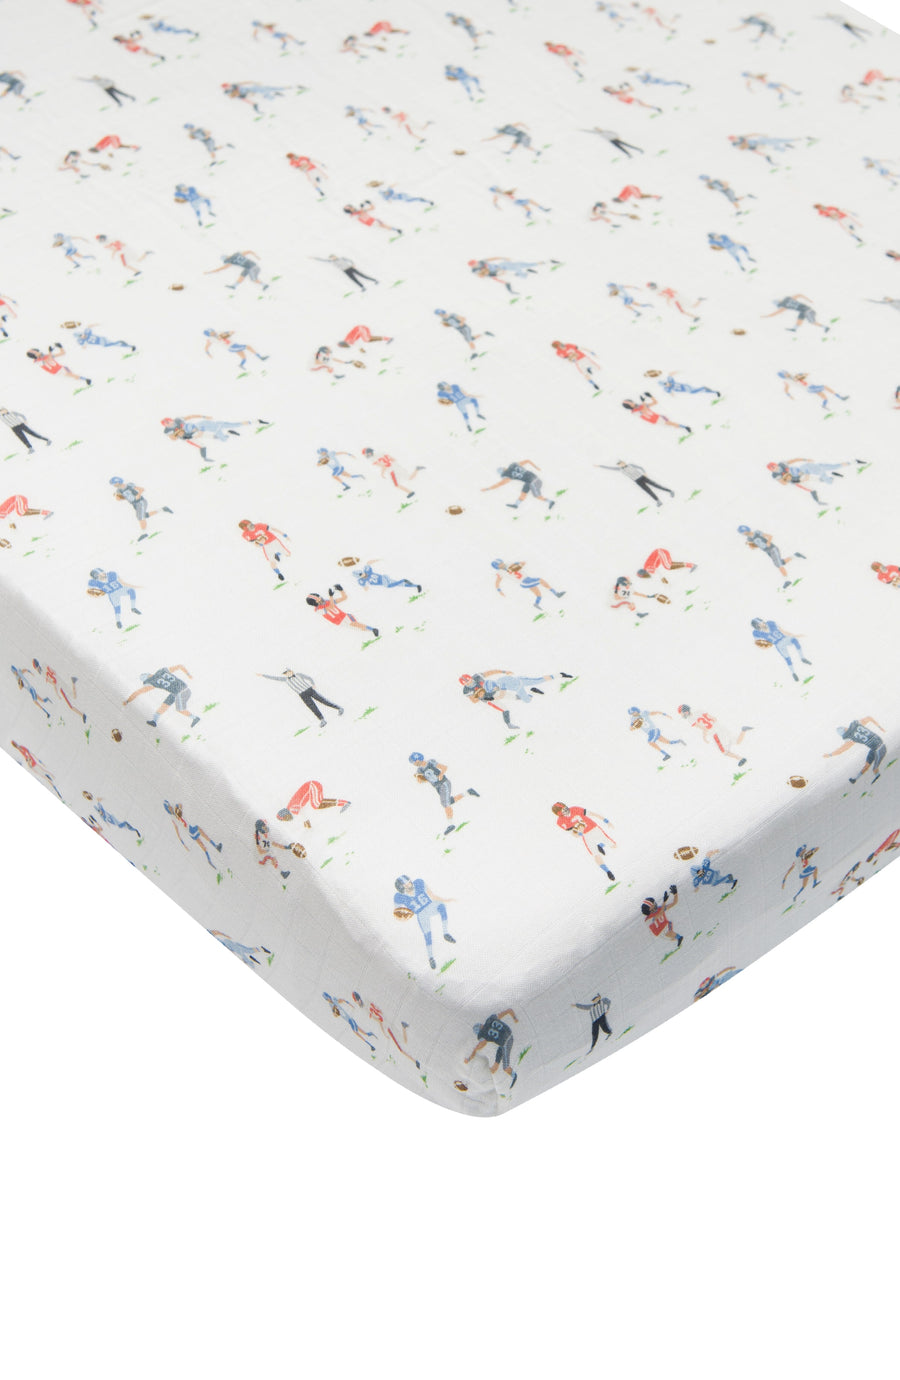 SS23 - Fitted Crib Sheet